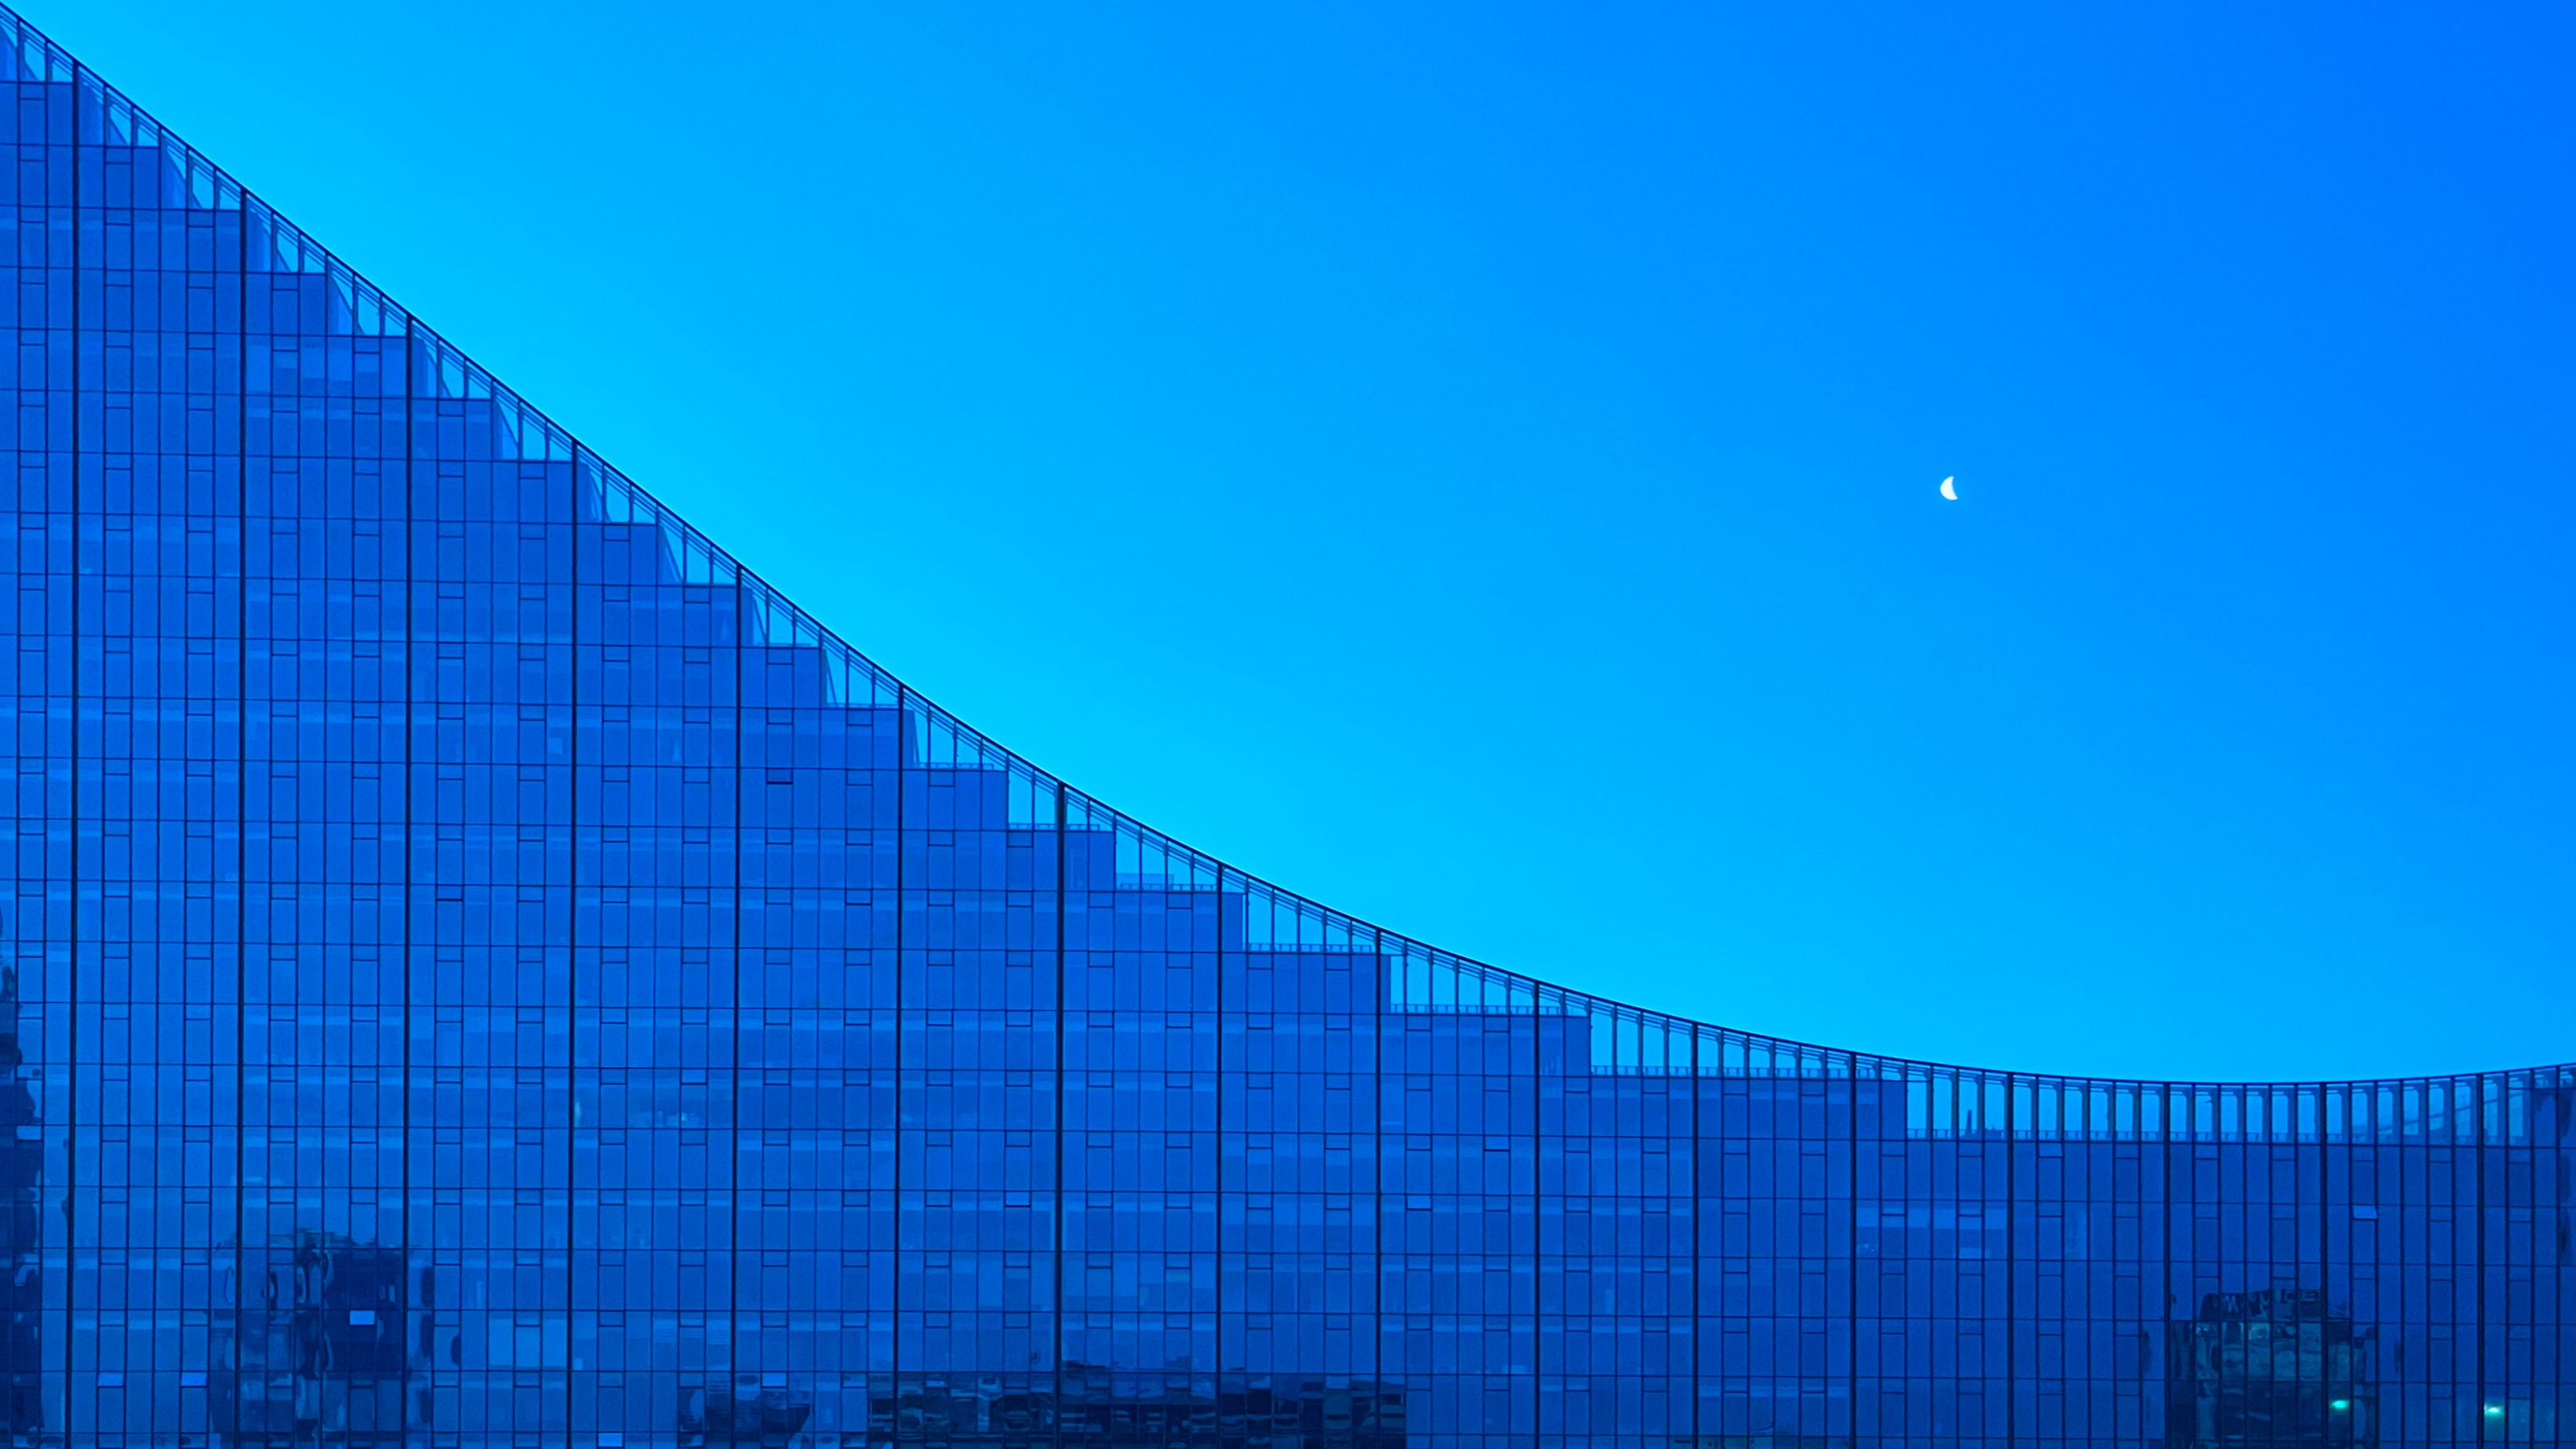 Curved glass building under evening sky with visible crescent moon. Reflections and silhouettes add detail to the modern architectural design.